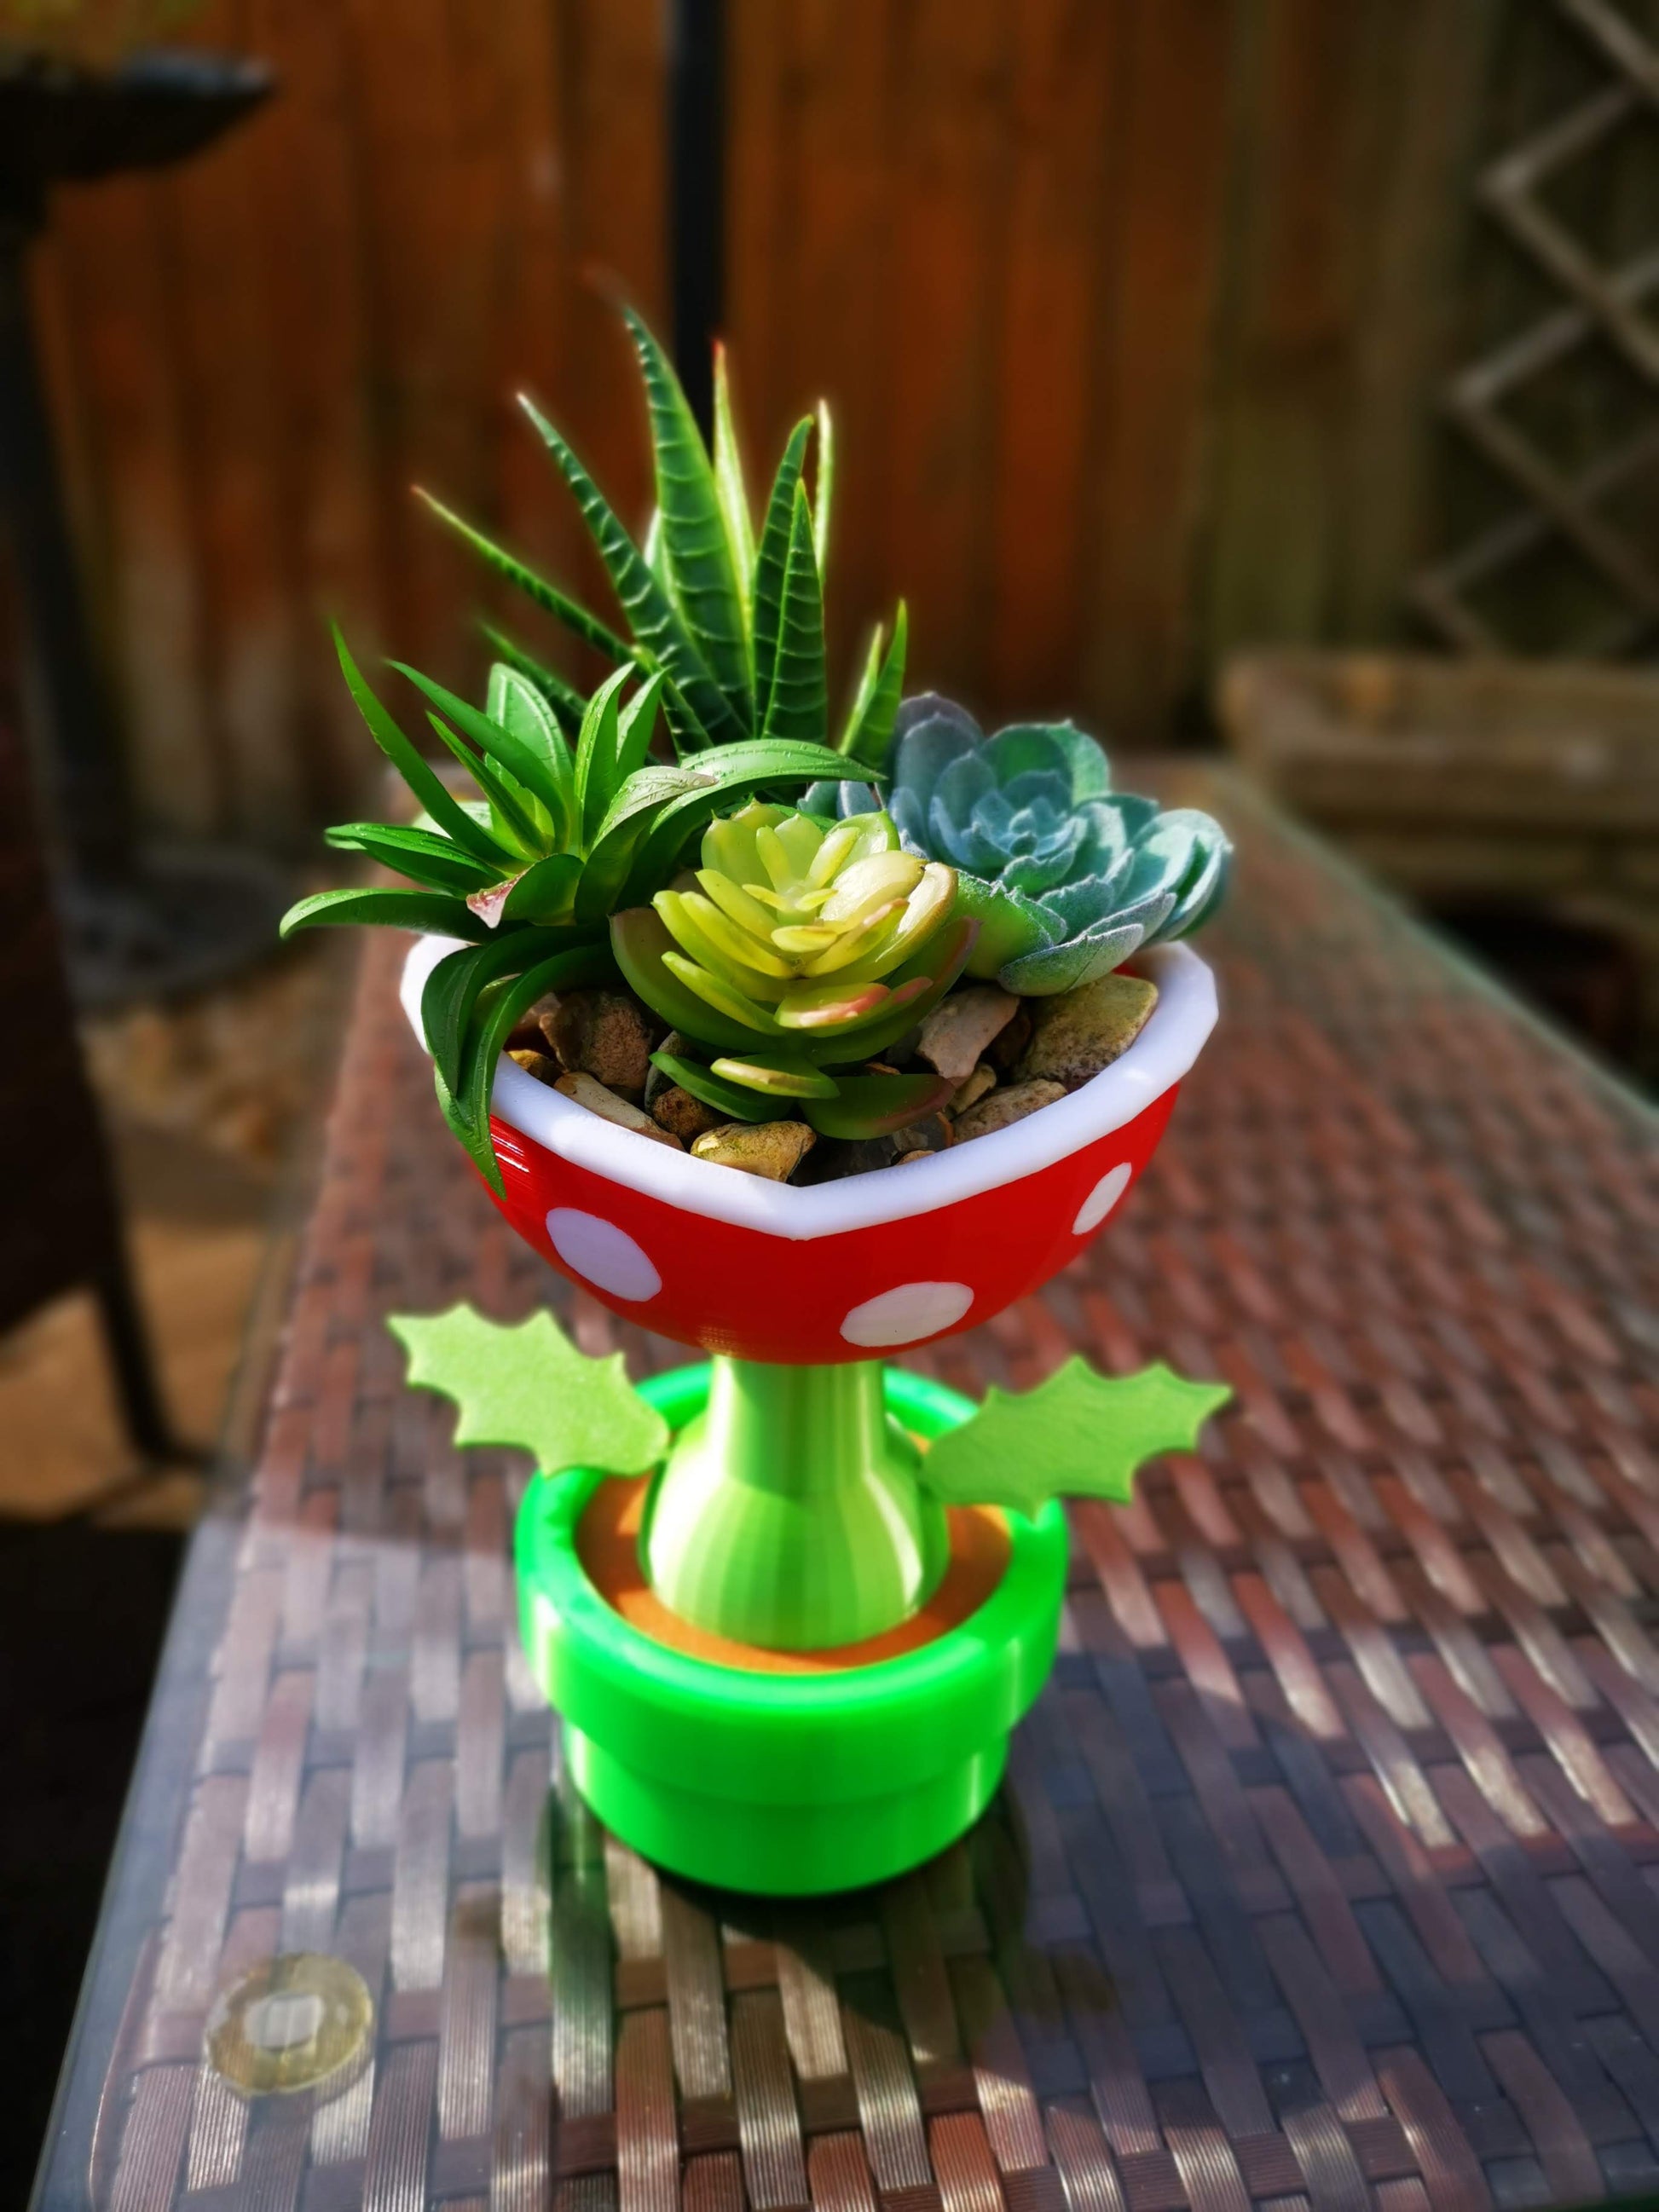 Petey Piranha planter outside from the top